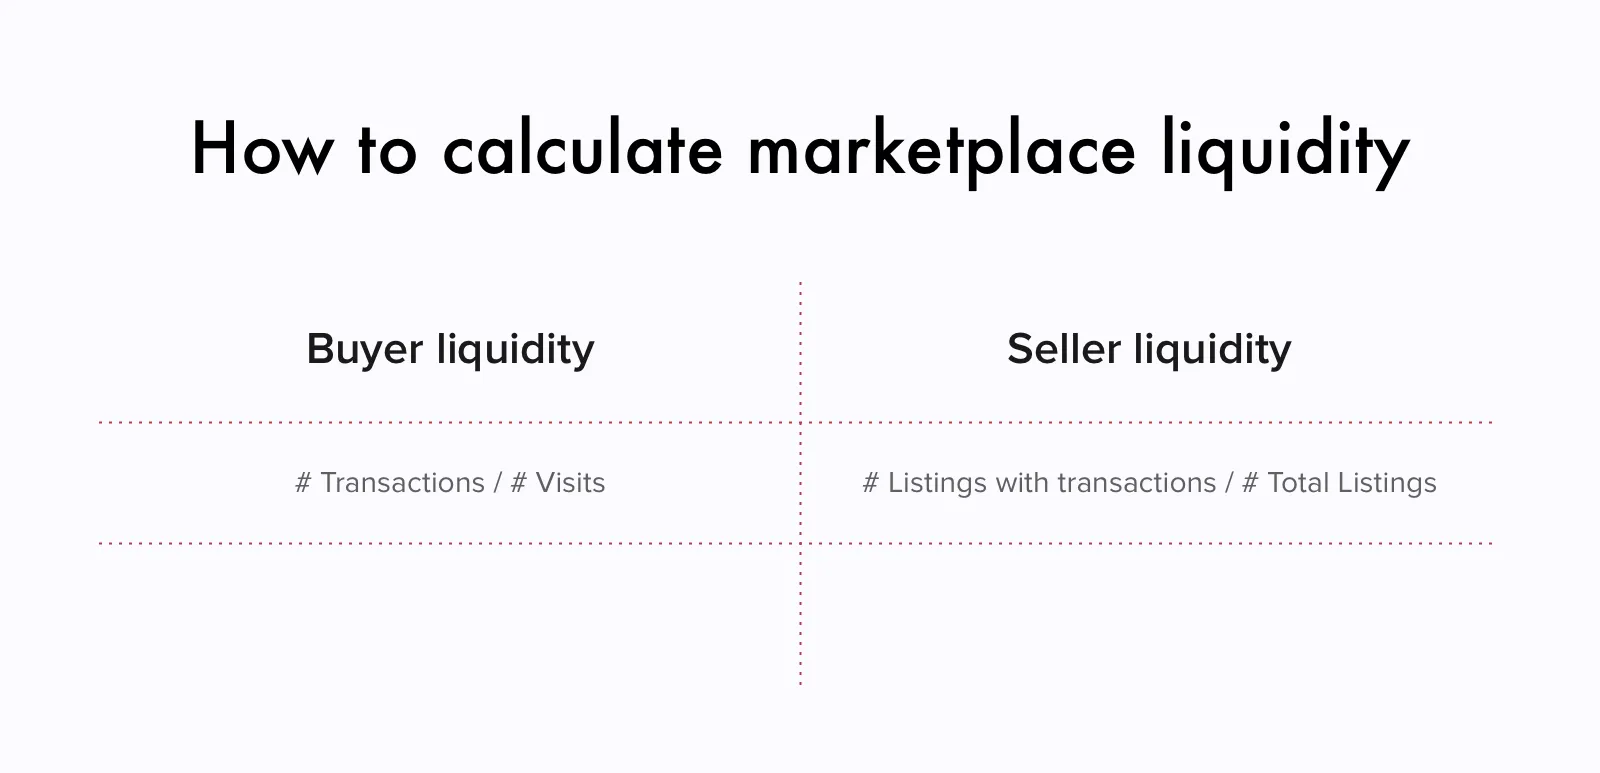 How to calculate marketpace liquidity